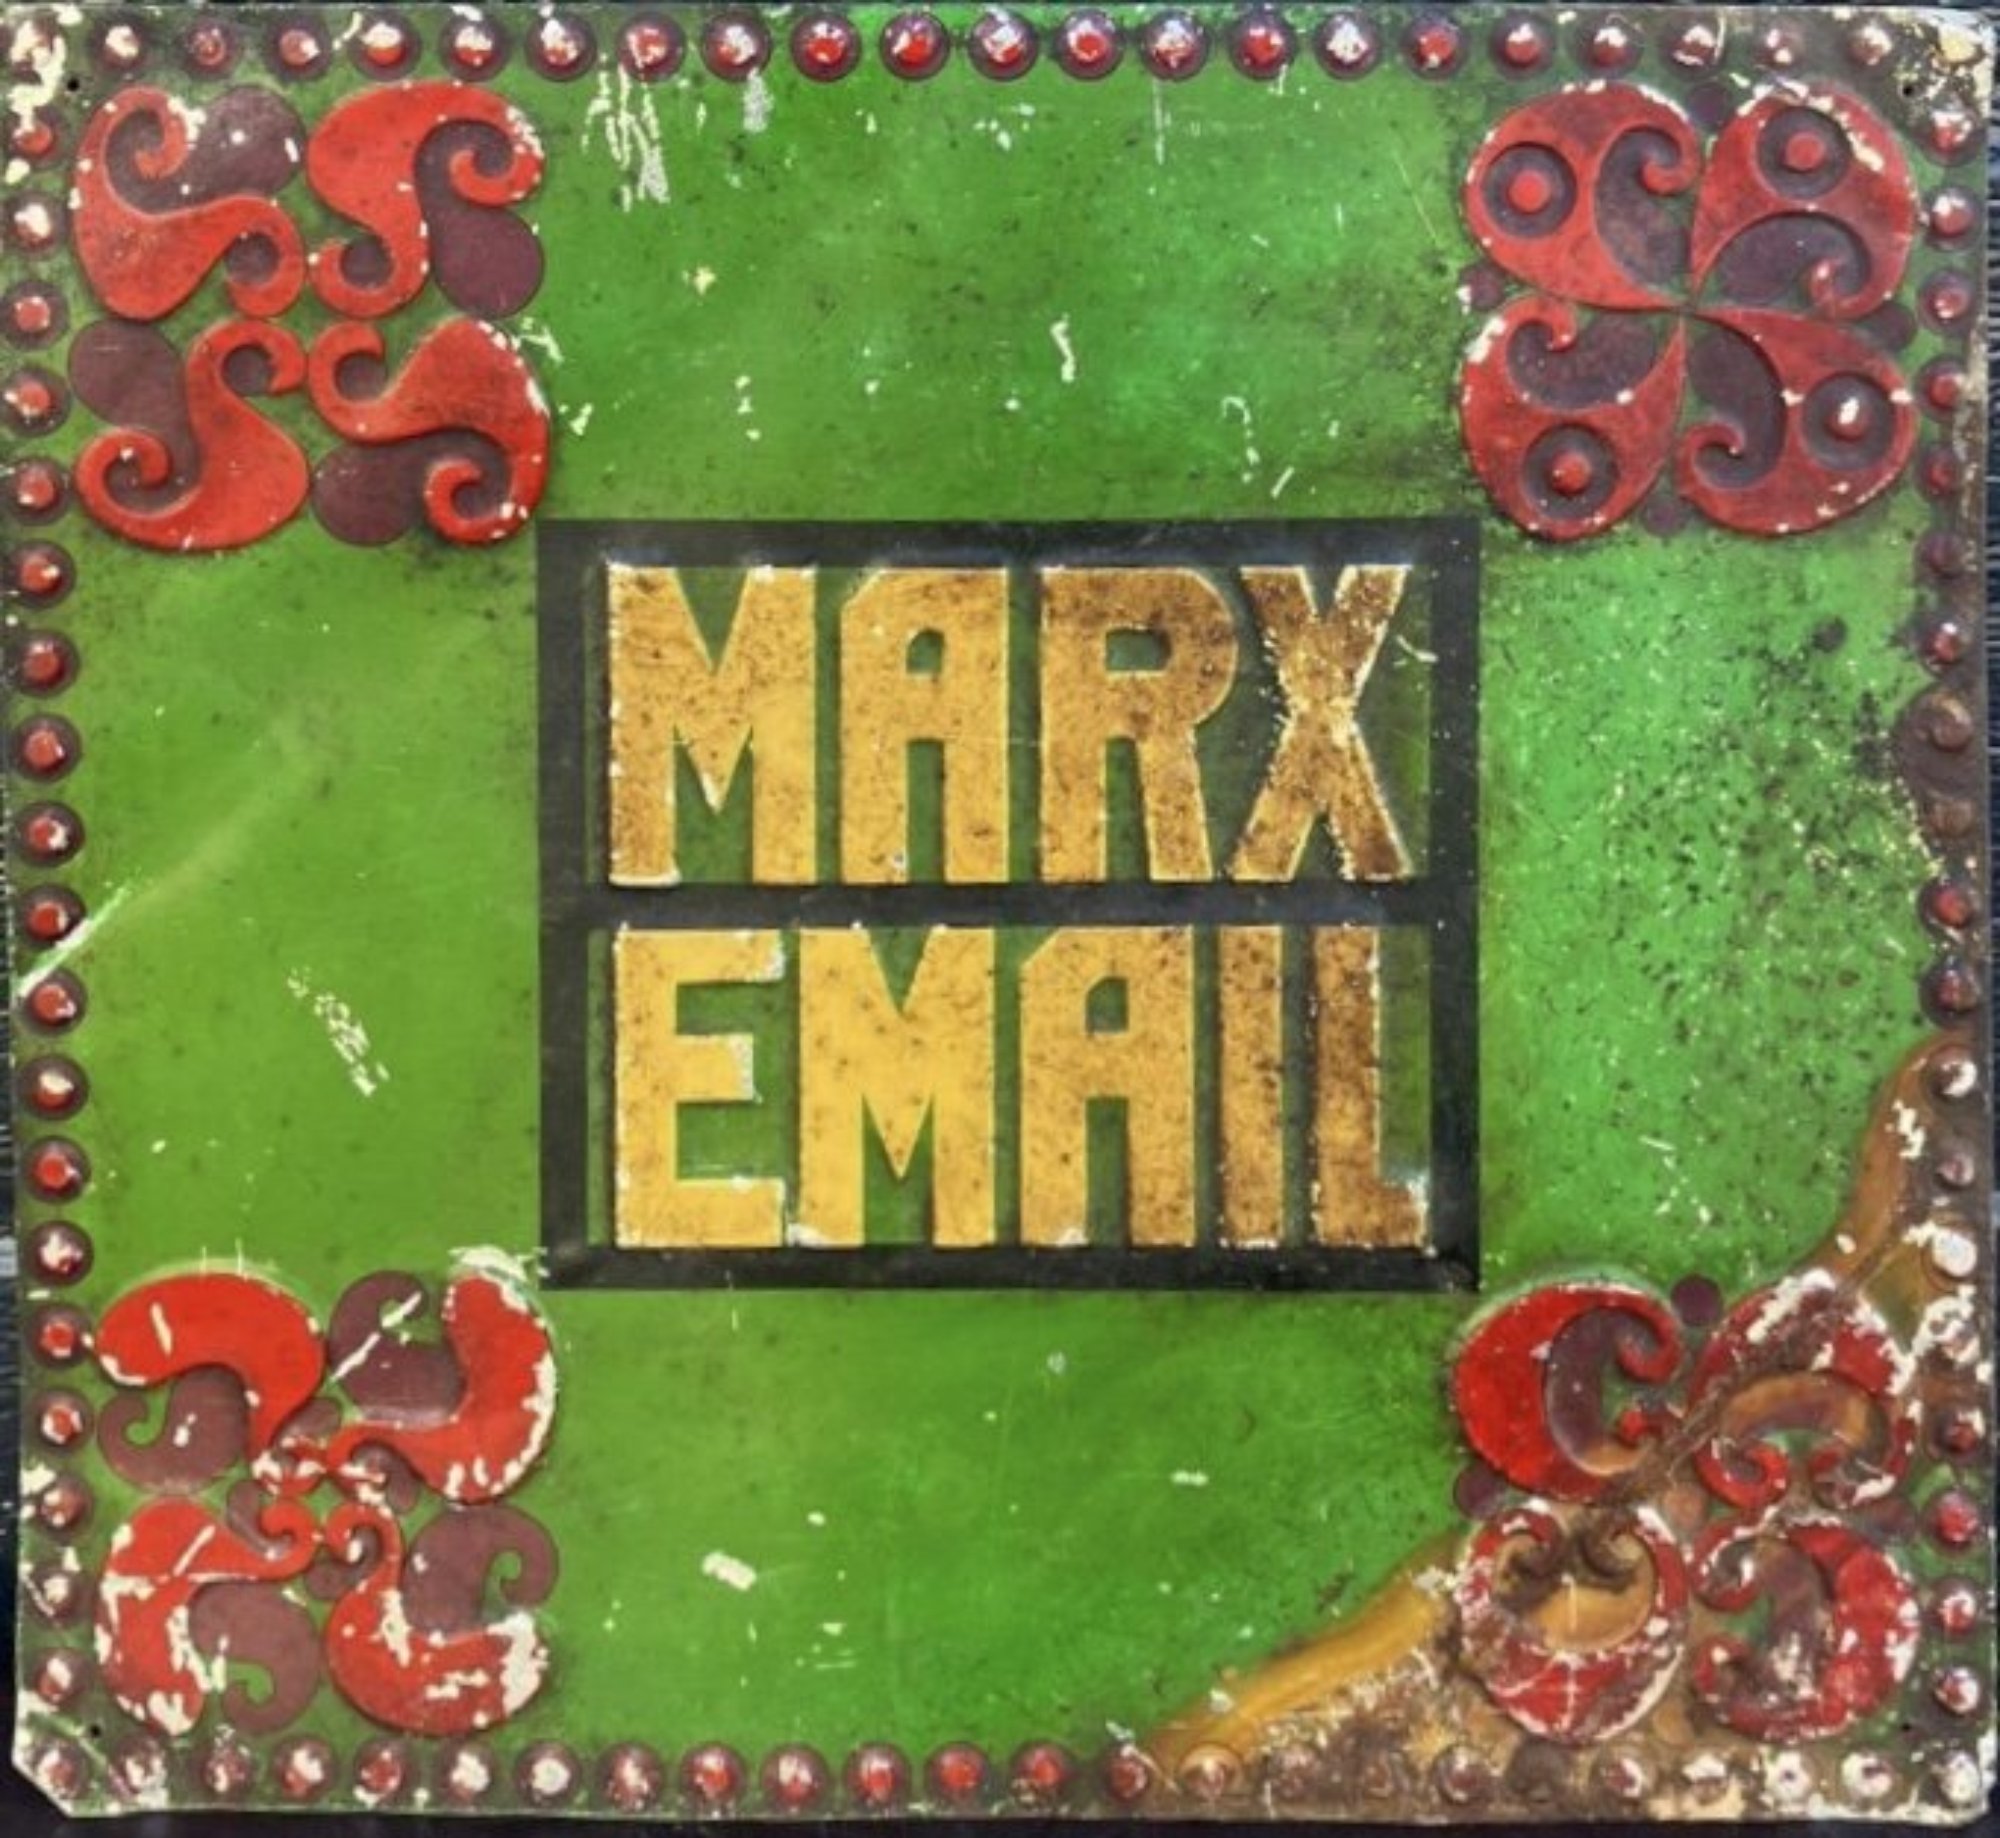 Marx Email